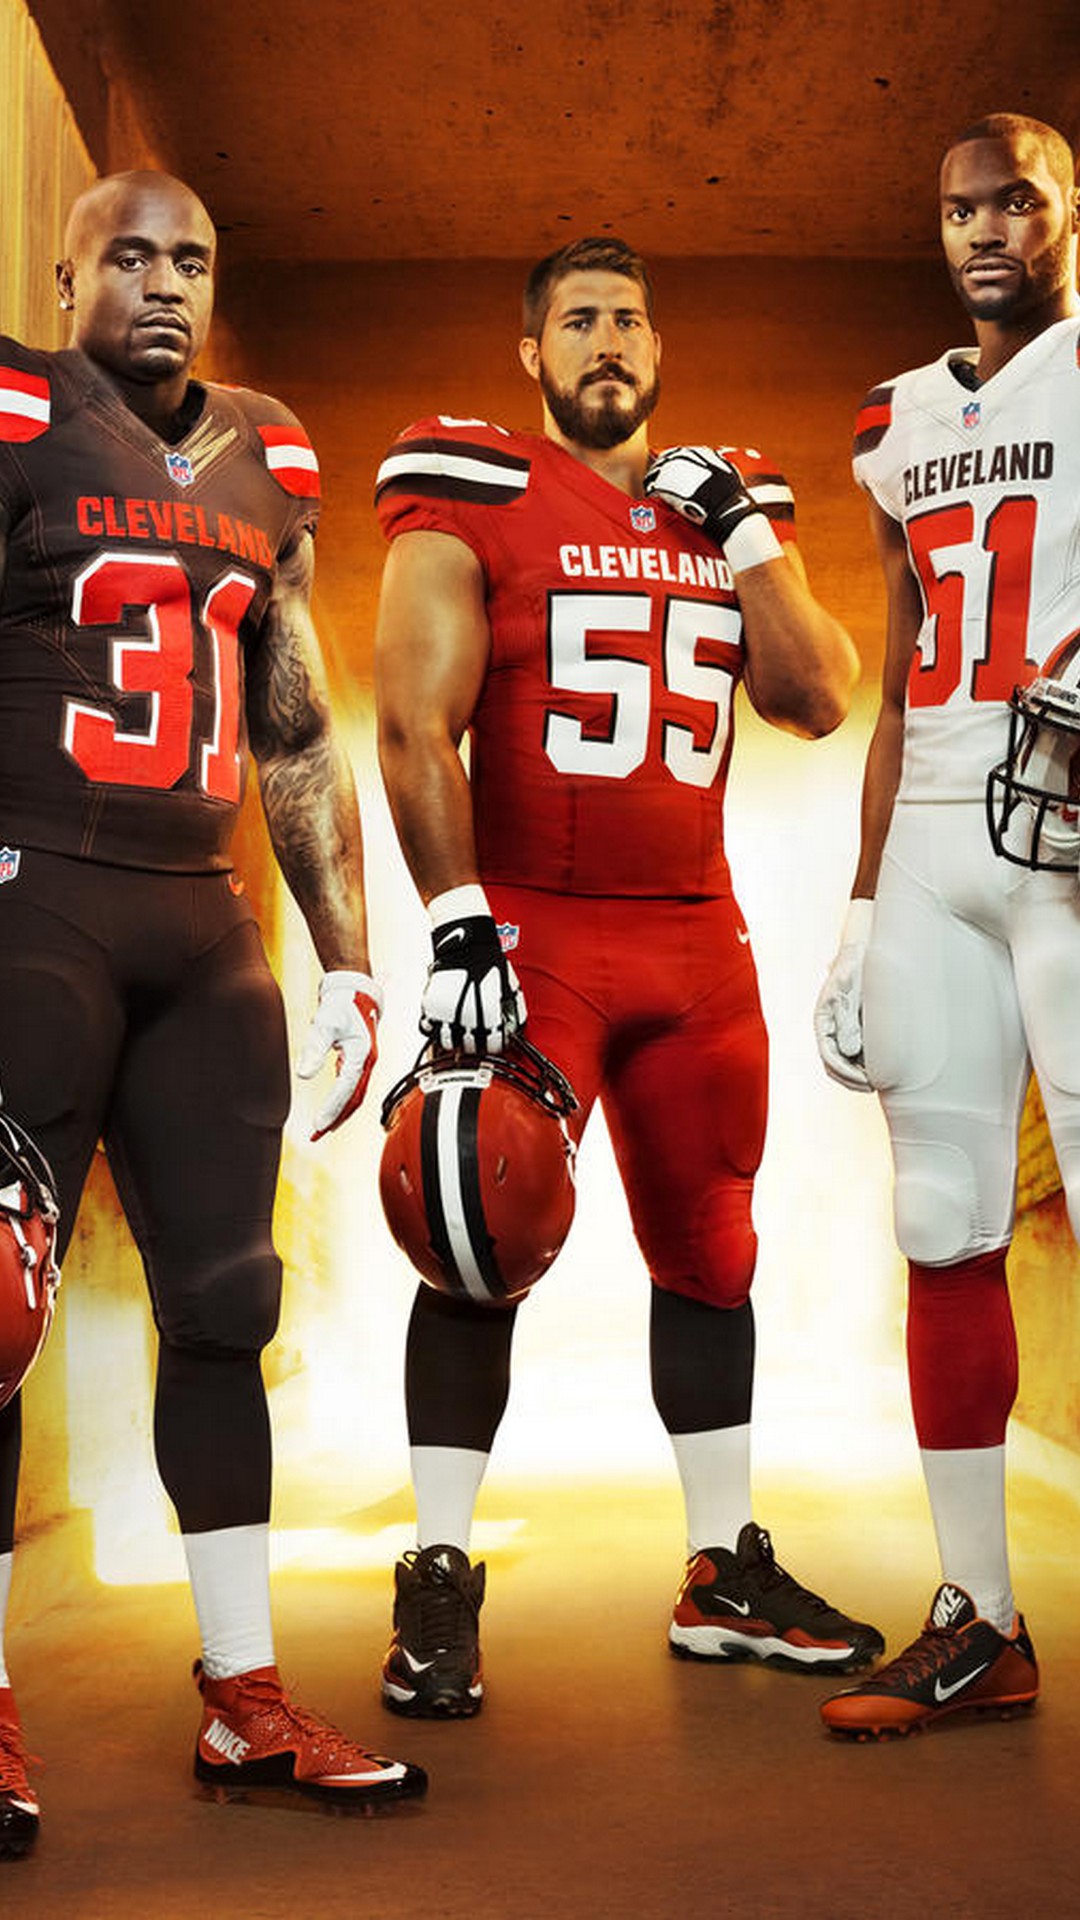 Free download Cleveland Browns wallpaper iPhone Cleveland browns wallpaper  640x960 for your Desktop Mobile  Tablet  Explore 25 Browns Wallpaper   Cleveland Browns 2015 Wallpaper Cleveland Browns Backgrounds Cleveland  Browns Wallpaper